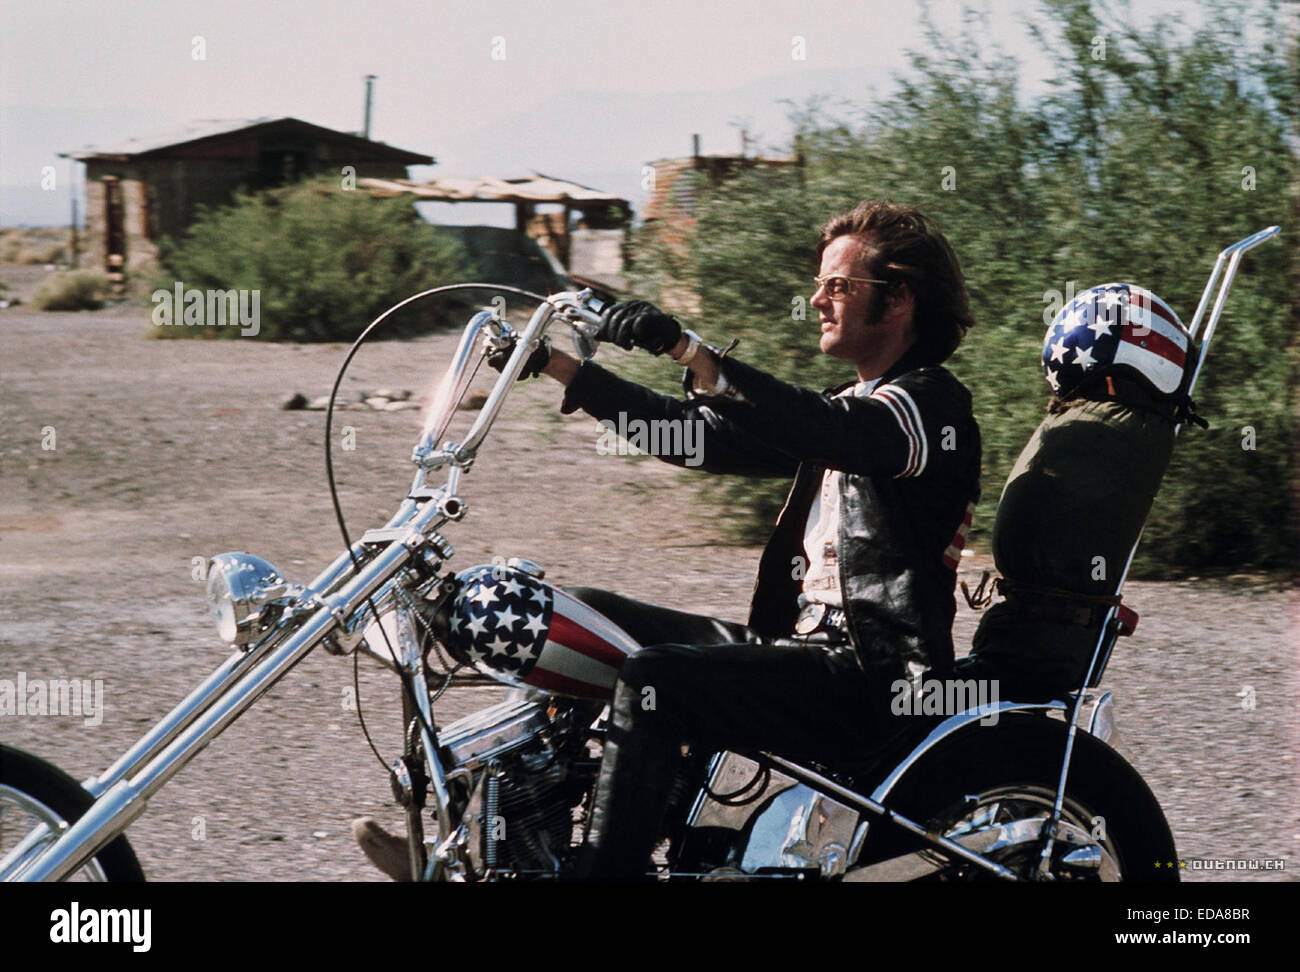 Easy Rider is a 1969 American road movie written by Peter Fonda, Dennis Hopper, and Terry Southern, produced by Fonda and directed by Hopper. It tells the story of two bikers (played by Fonda and Hopper) who travel through the American Southwest and South. Stock Photo